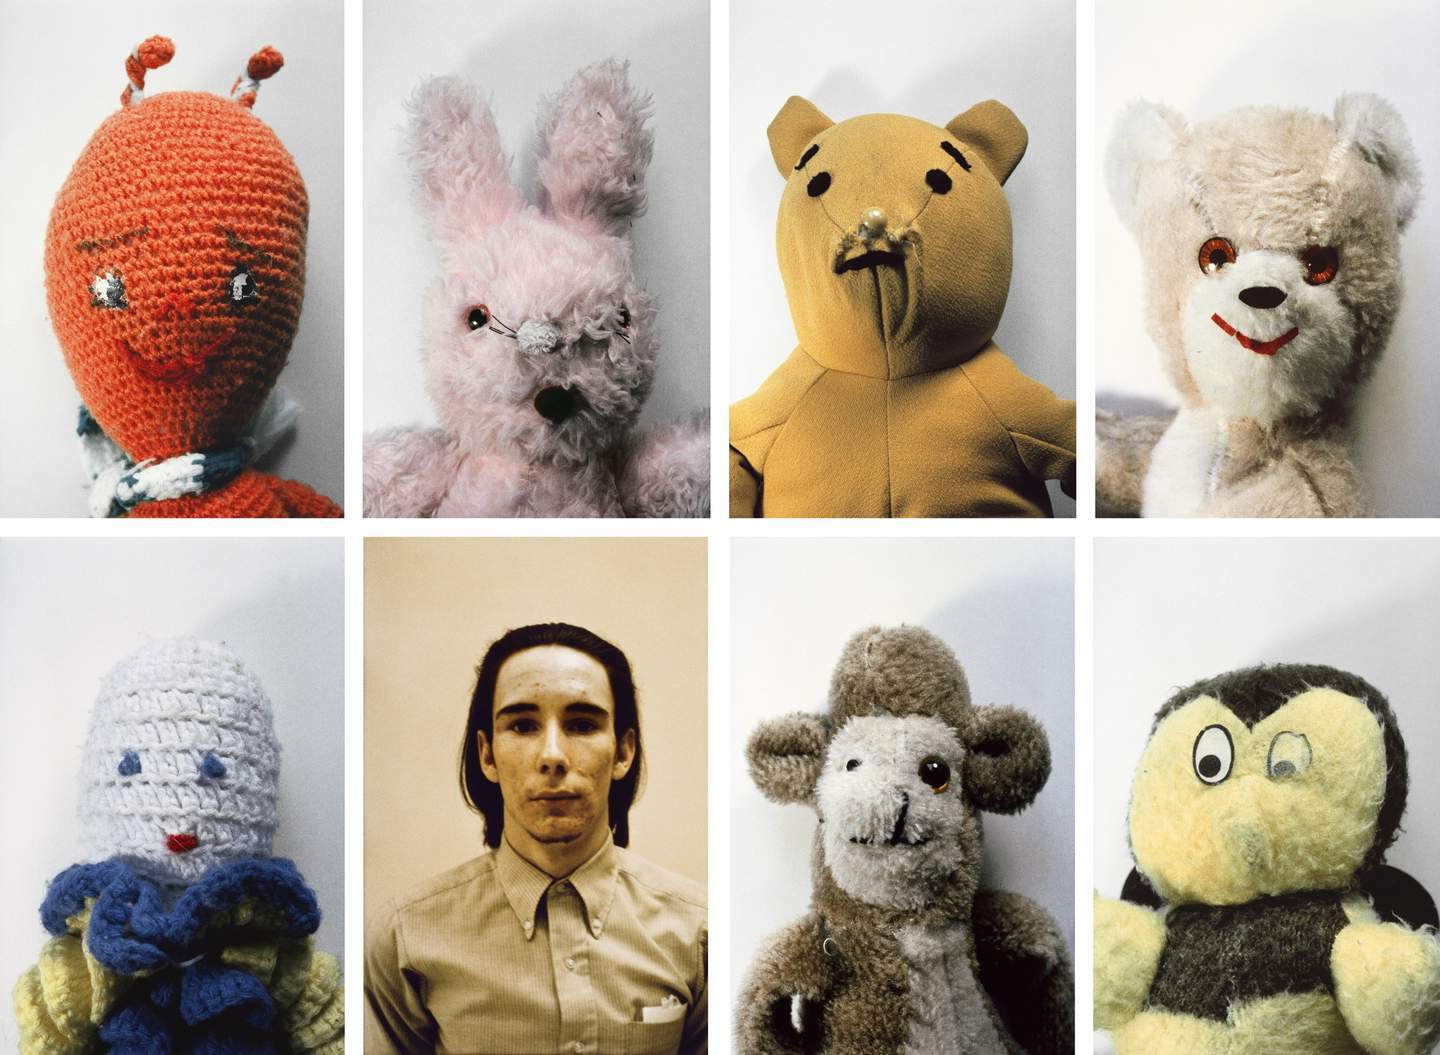 Mike Kelley, Ahh...Youth! 1991. © Mike Kelley Foundation for the Arts. All Rights Reserved / VAGA at ARS, NY